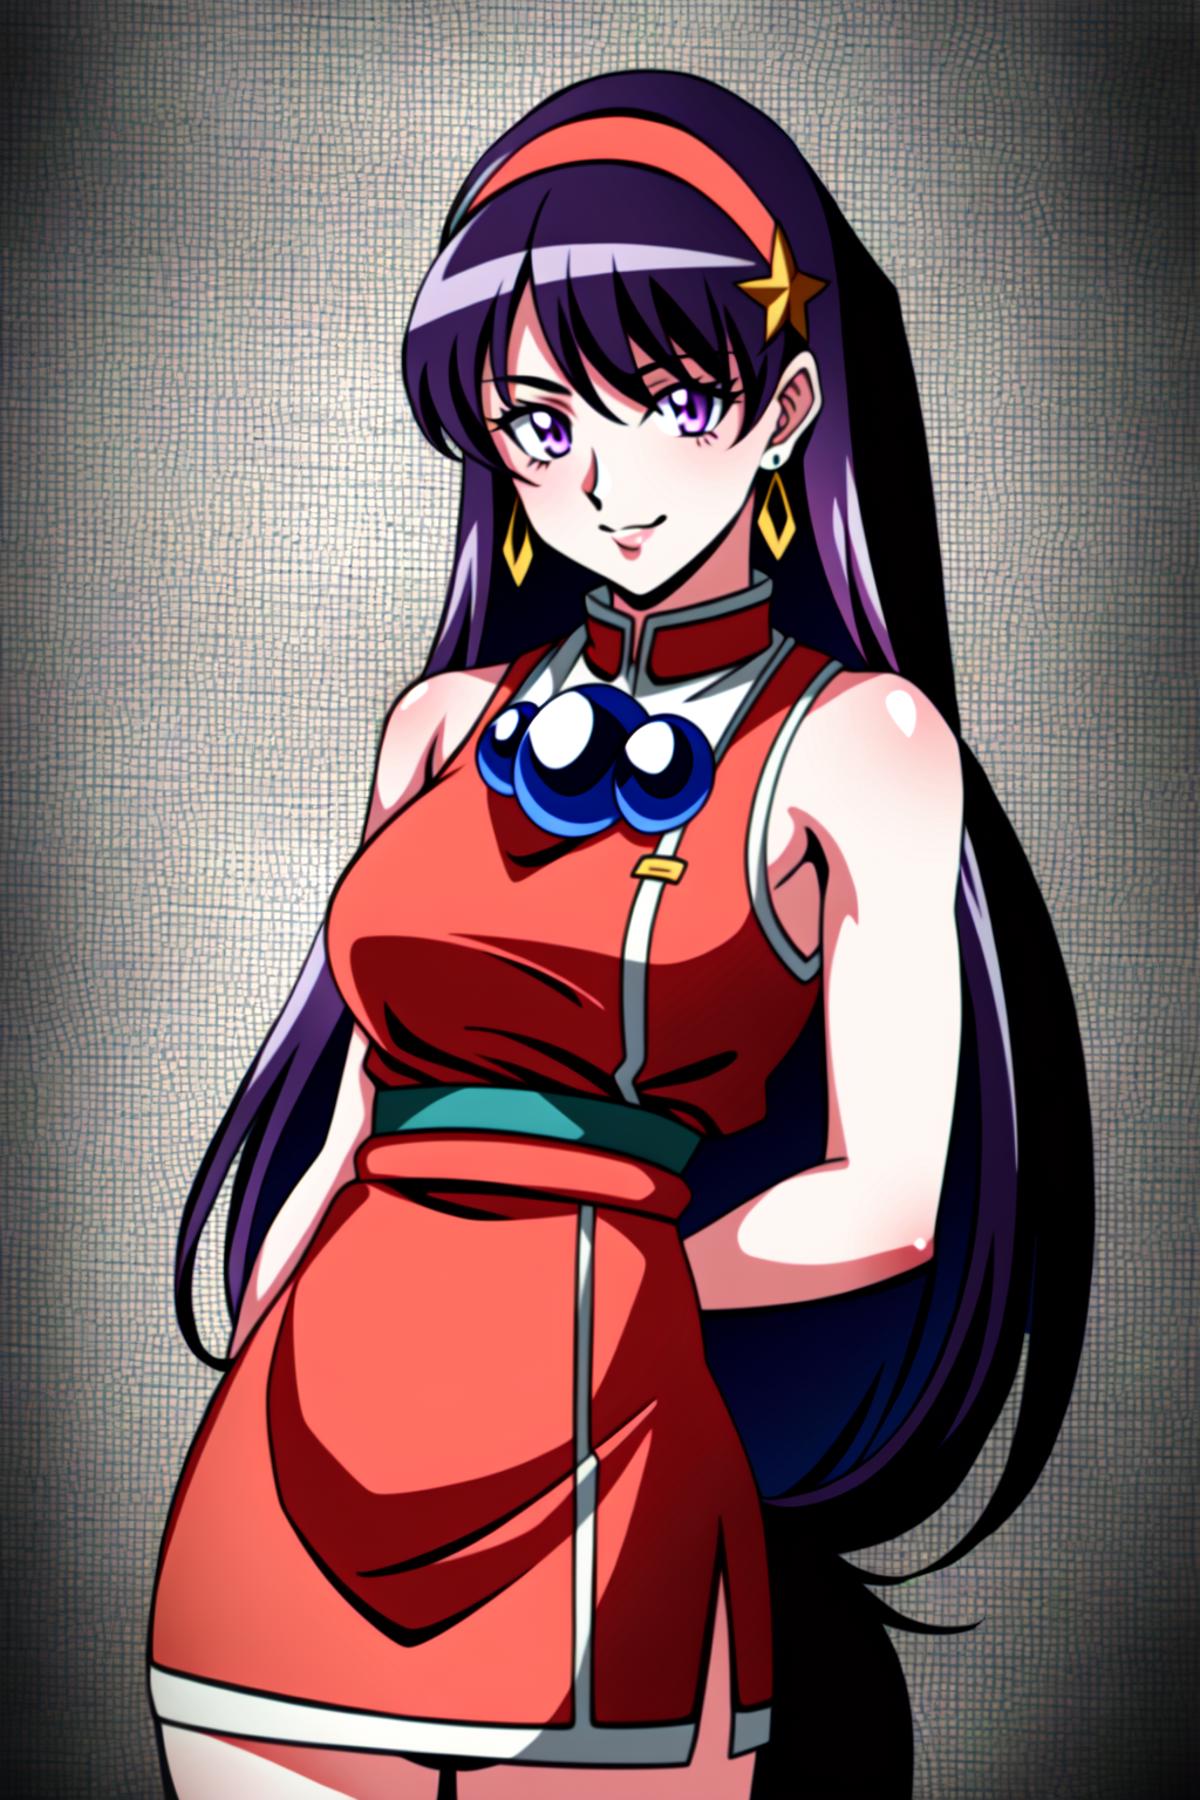 Athena Asamiya | King of Fighters image by OG_Turles